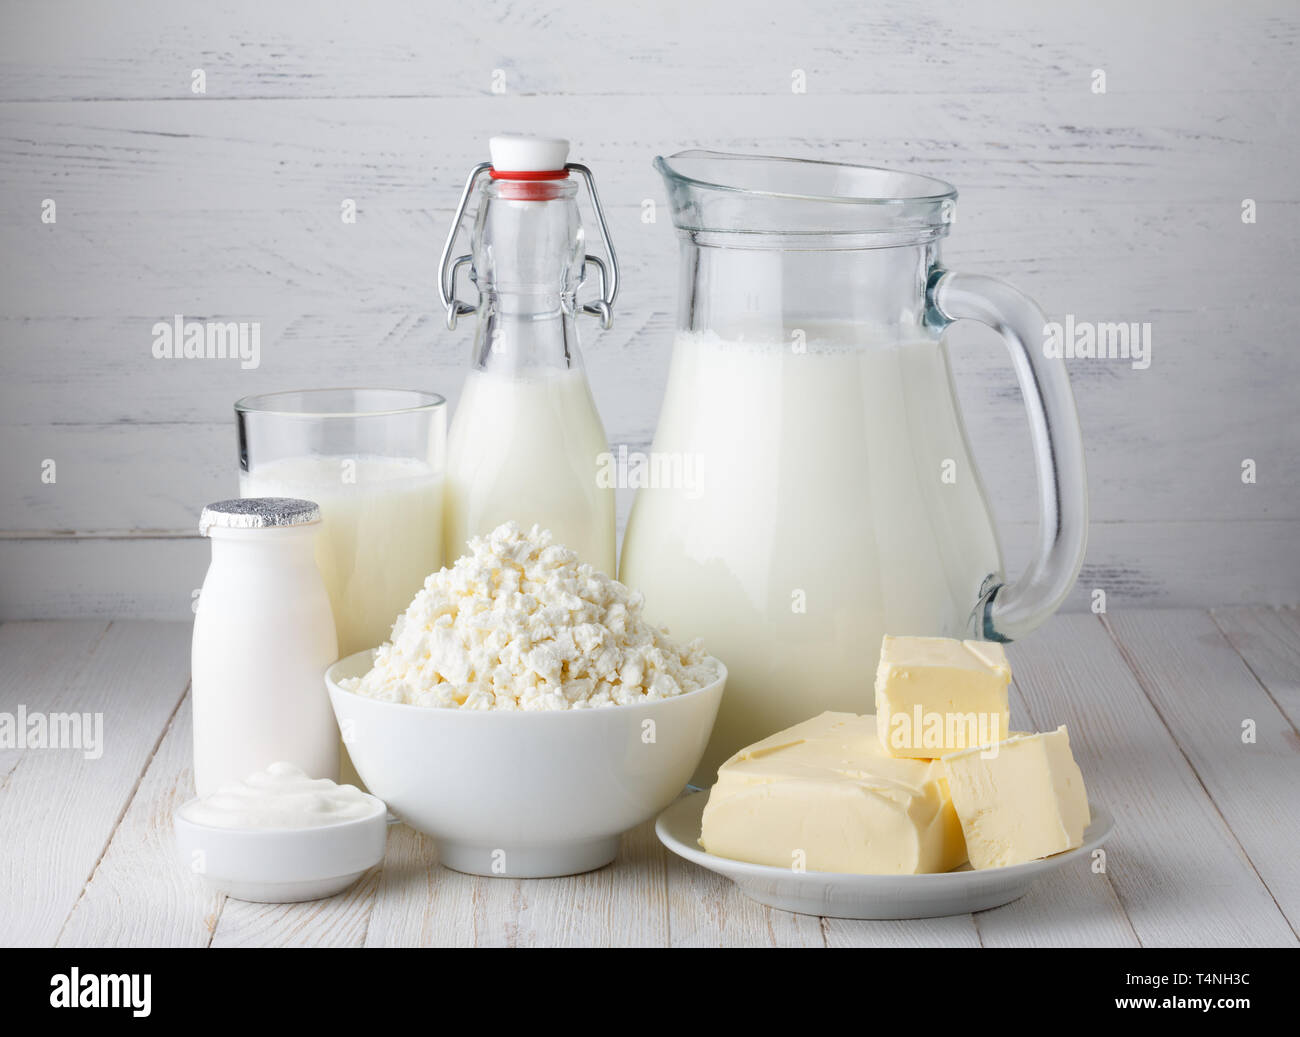 Dairy products, milk, cottage cheese, yogurt, sour cream and butter on wooden table Stock Photo